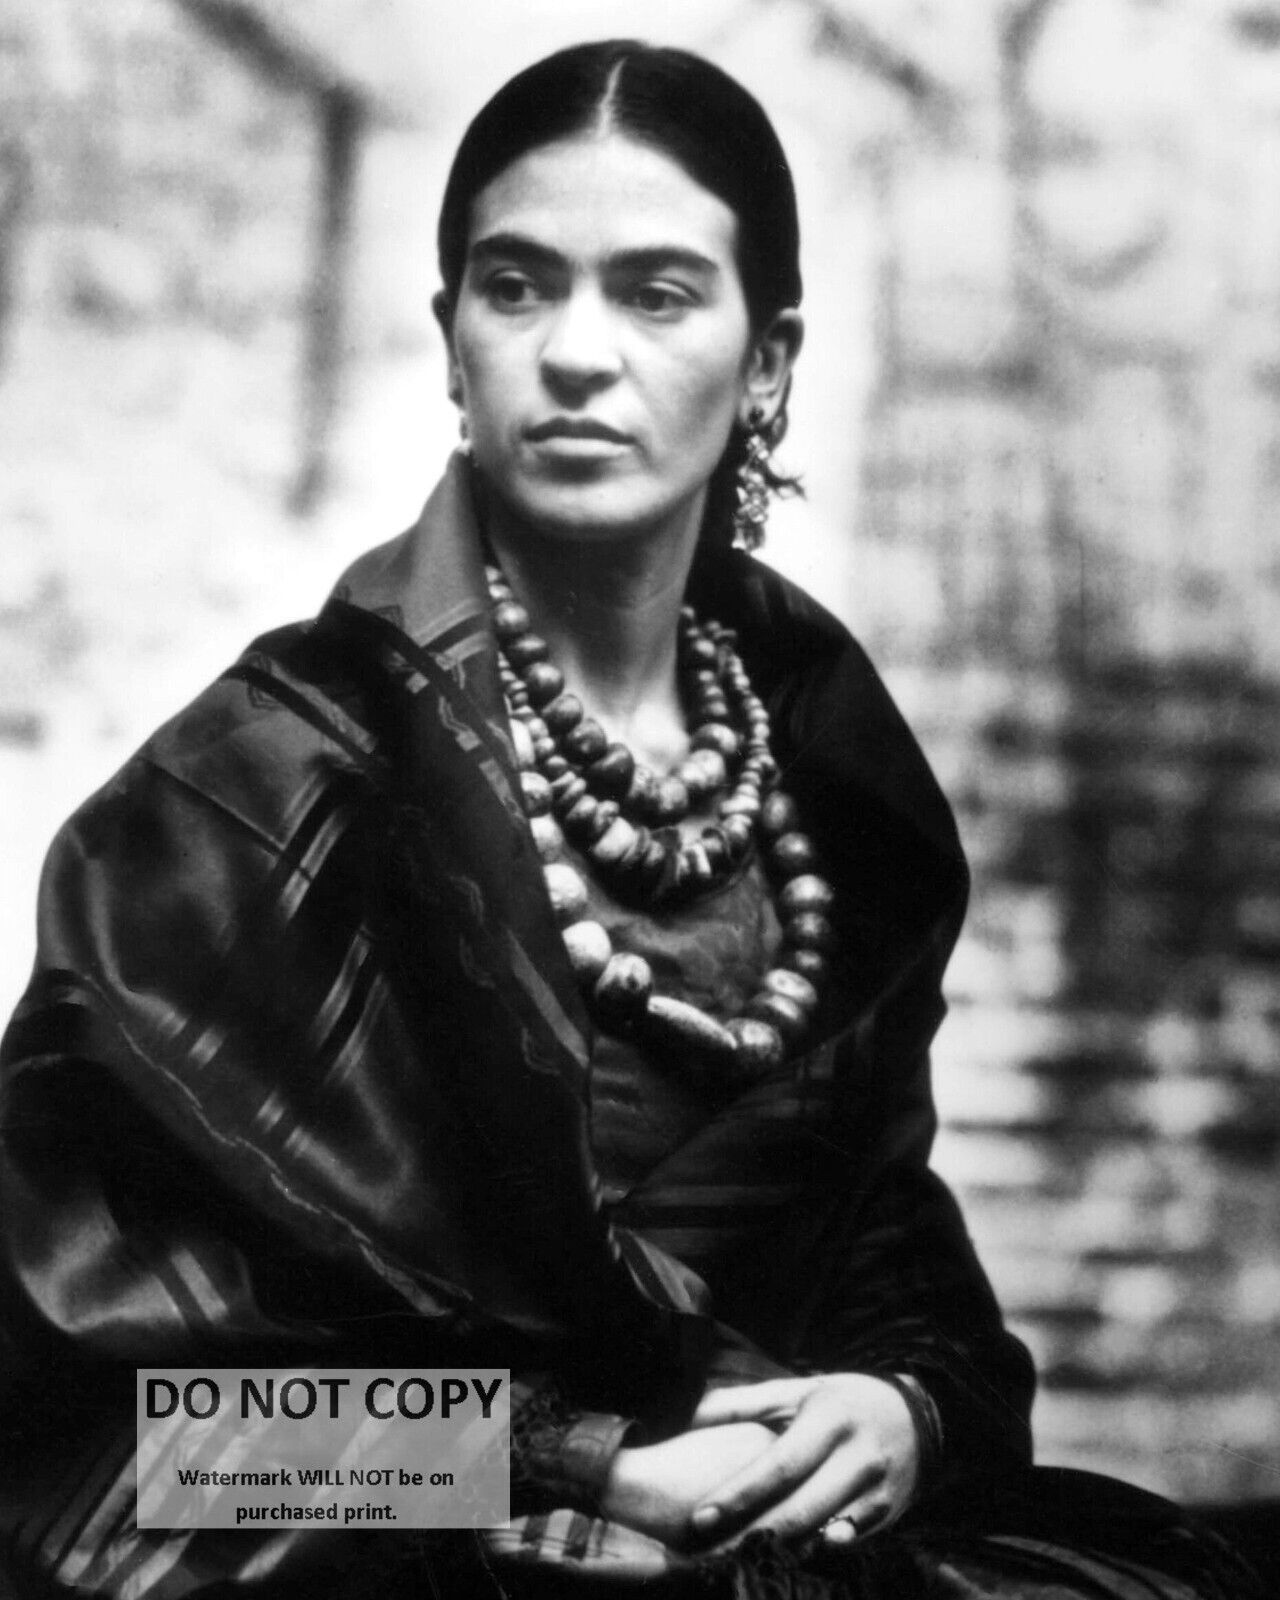 FRIDA KAHLO MEXICAN PAINTER IN 1930 - 8X10 PHOTO (MW770)